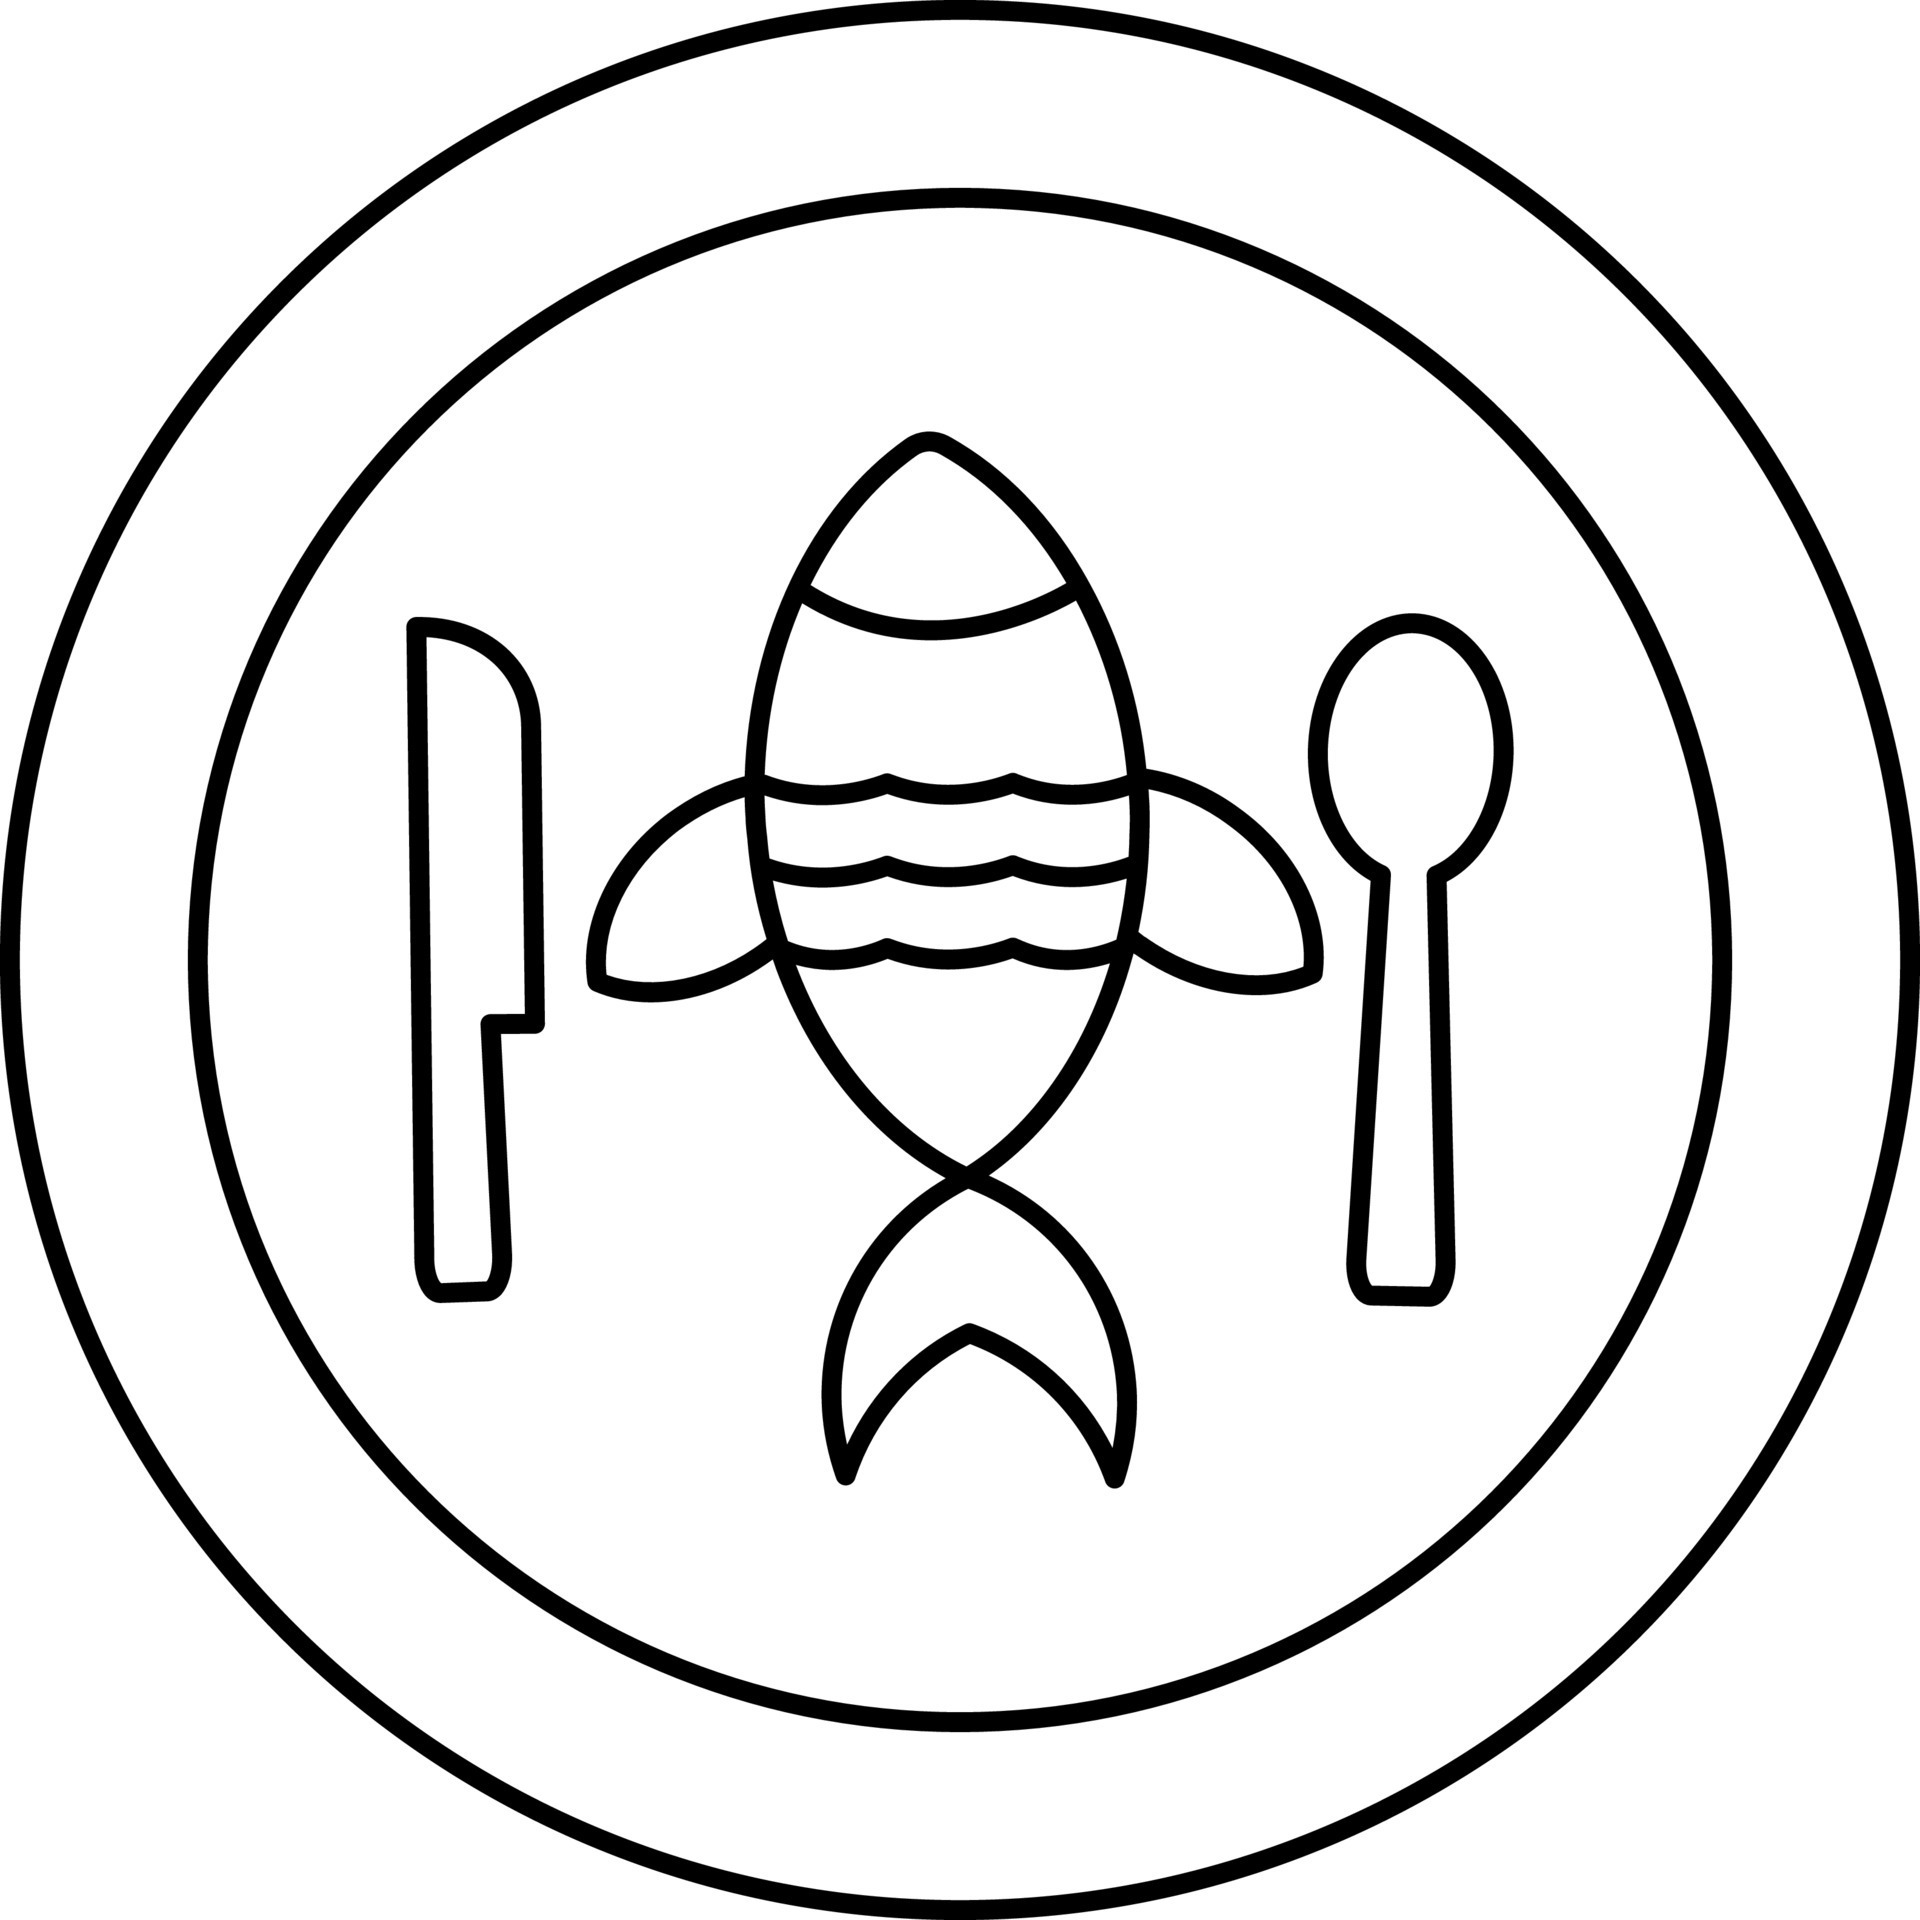 Fried Fish On Plate Icon In Black Line Art. 24325070 Vector Art at